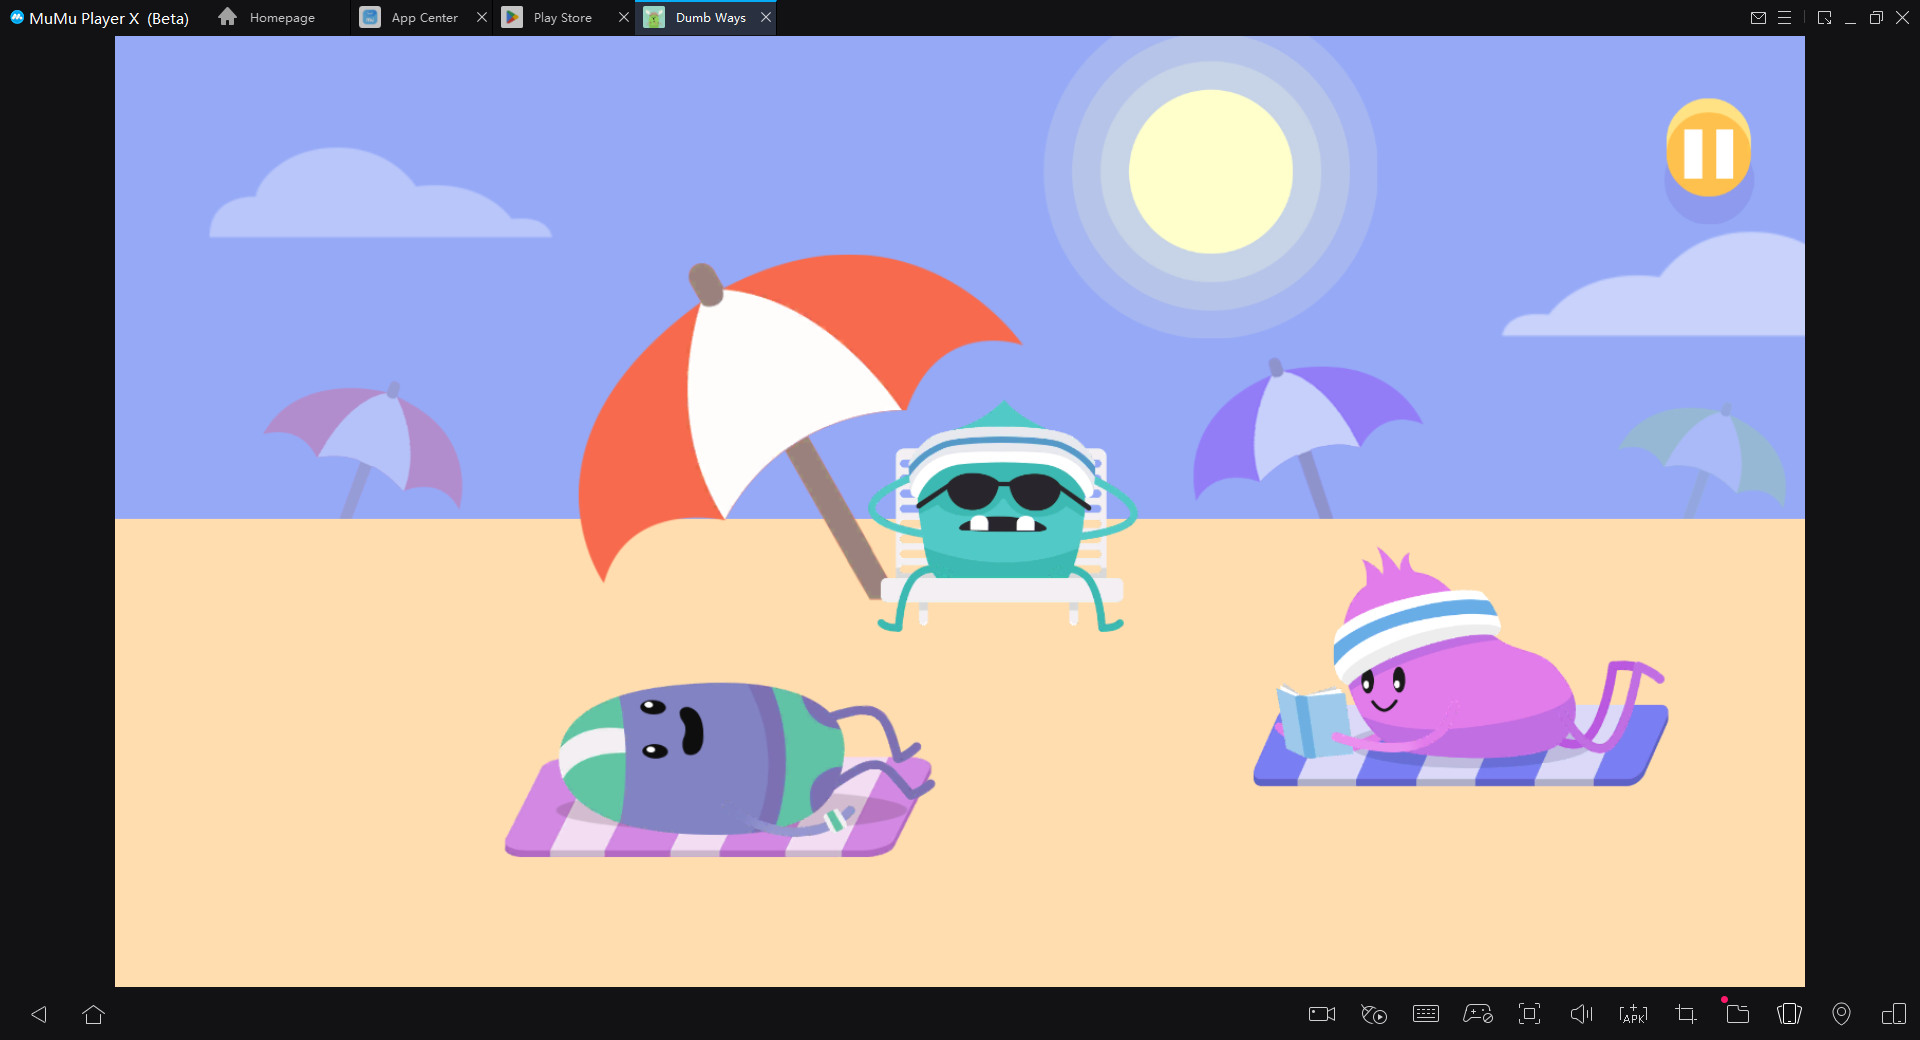 All Characters in Dumb Ways to Die